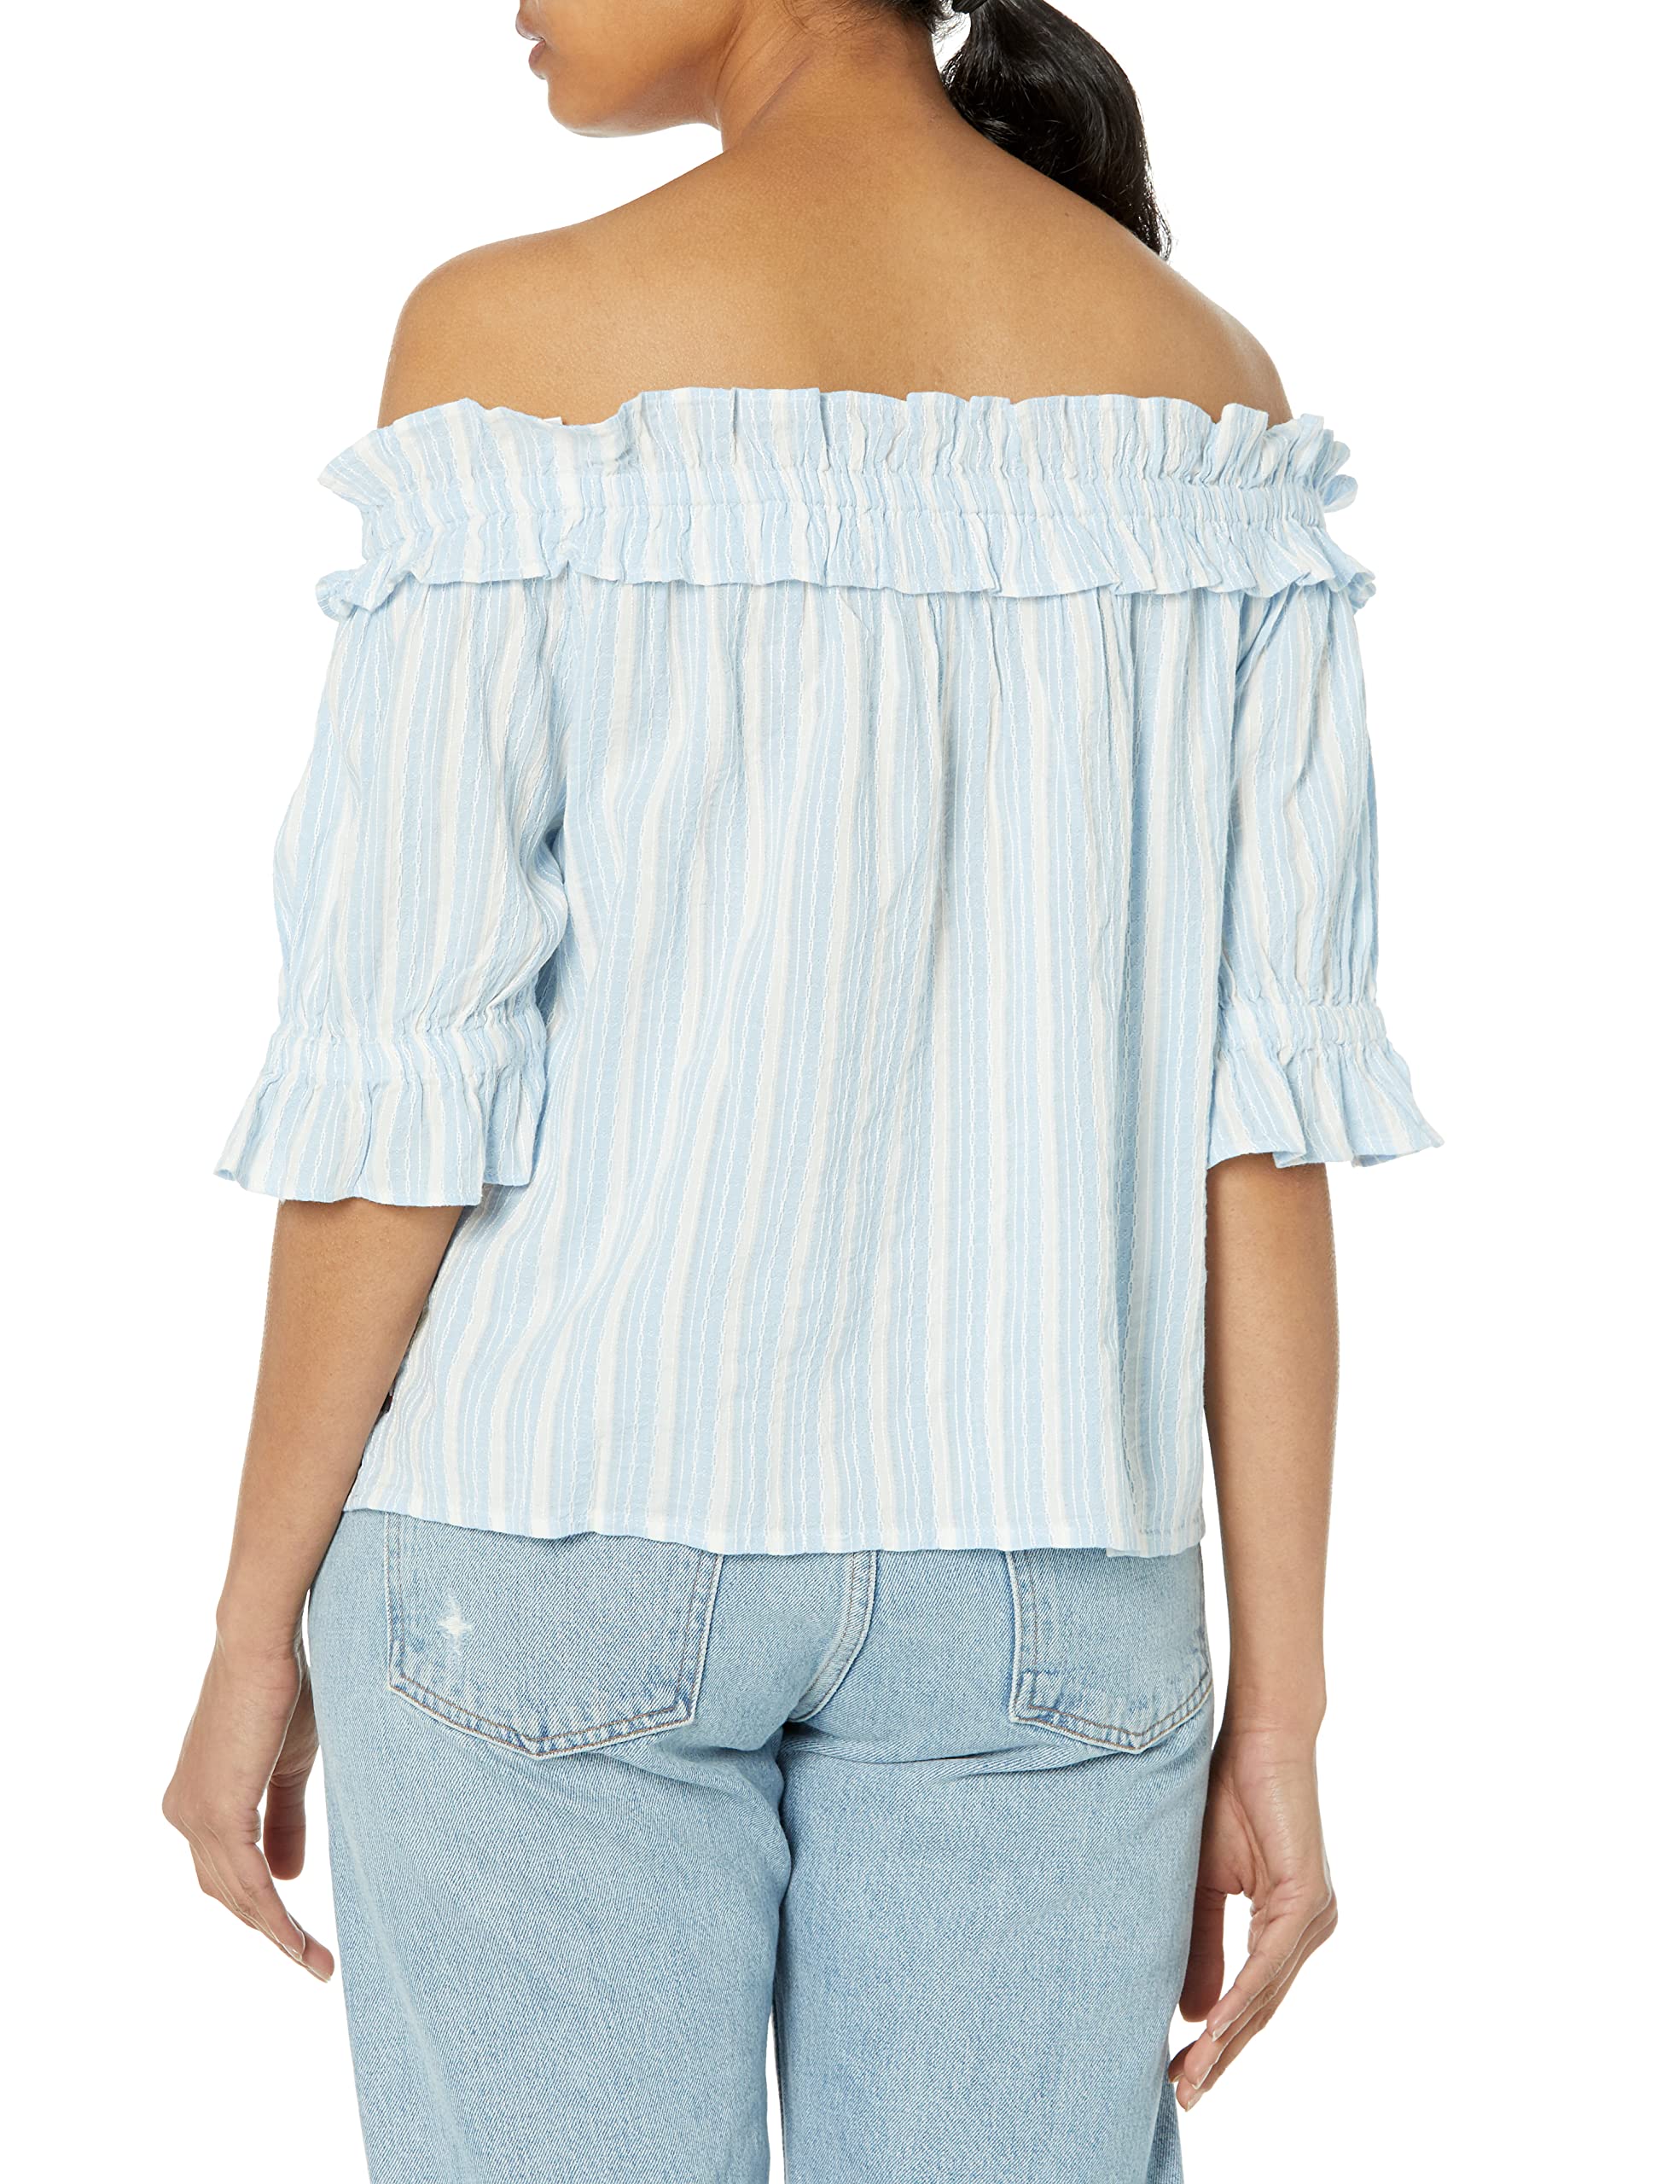 Tommy Hilfiger Women's Stripes Ruffles Off The Shoulder Casual